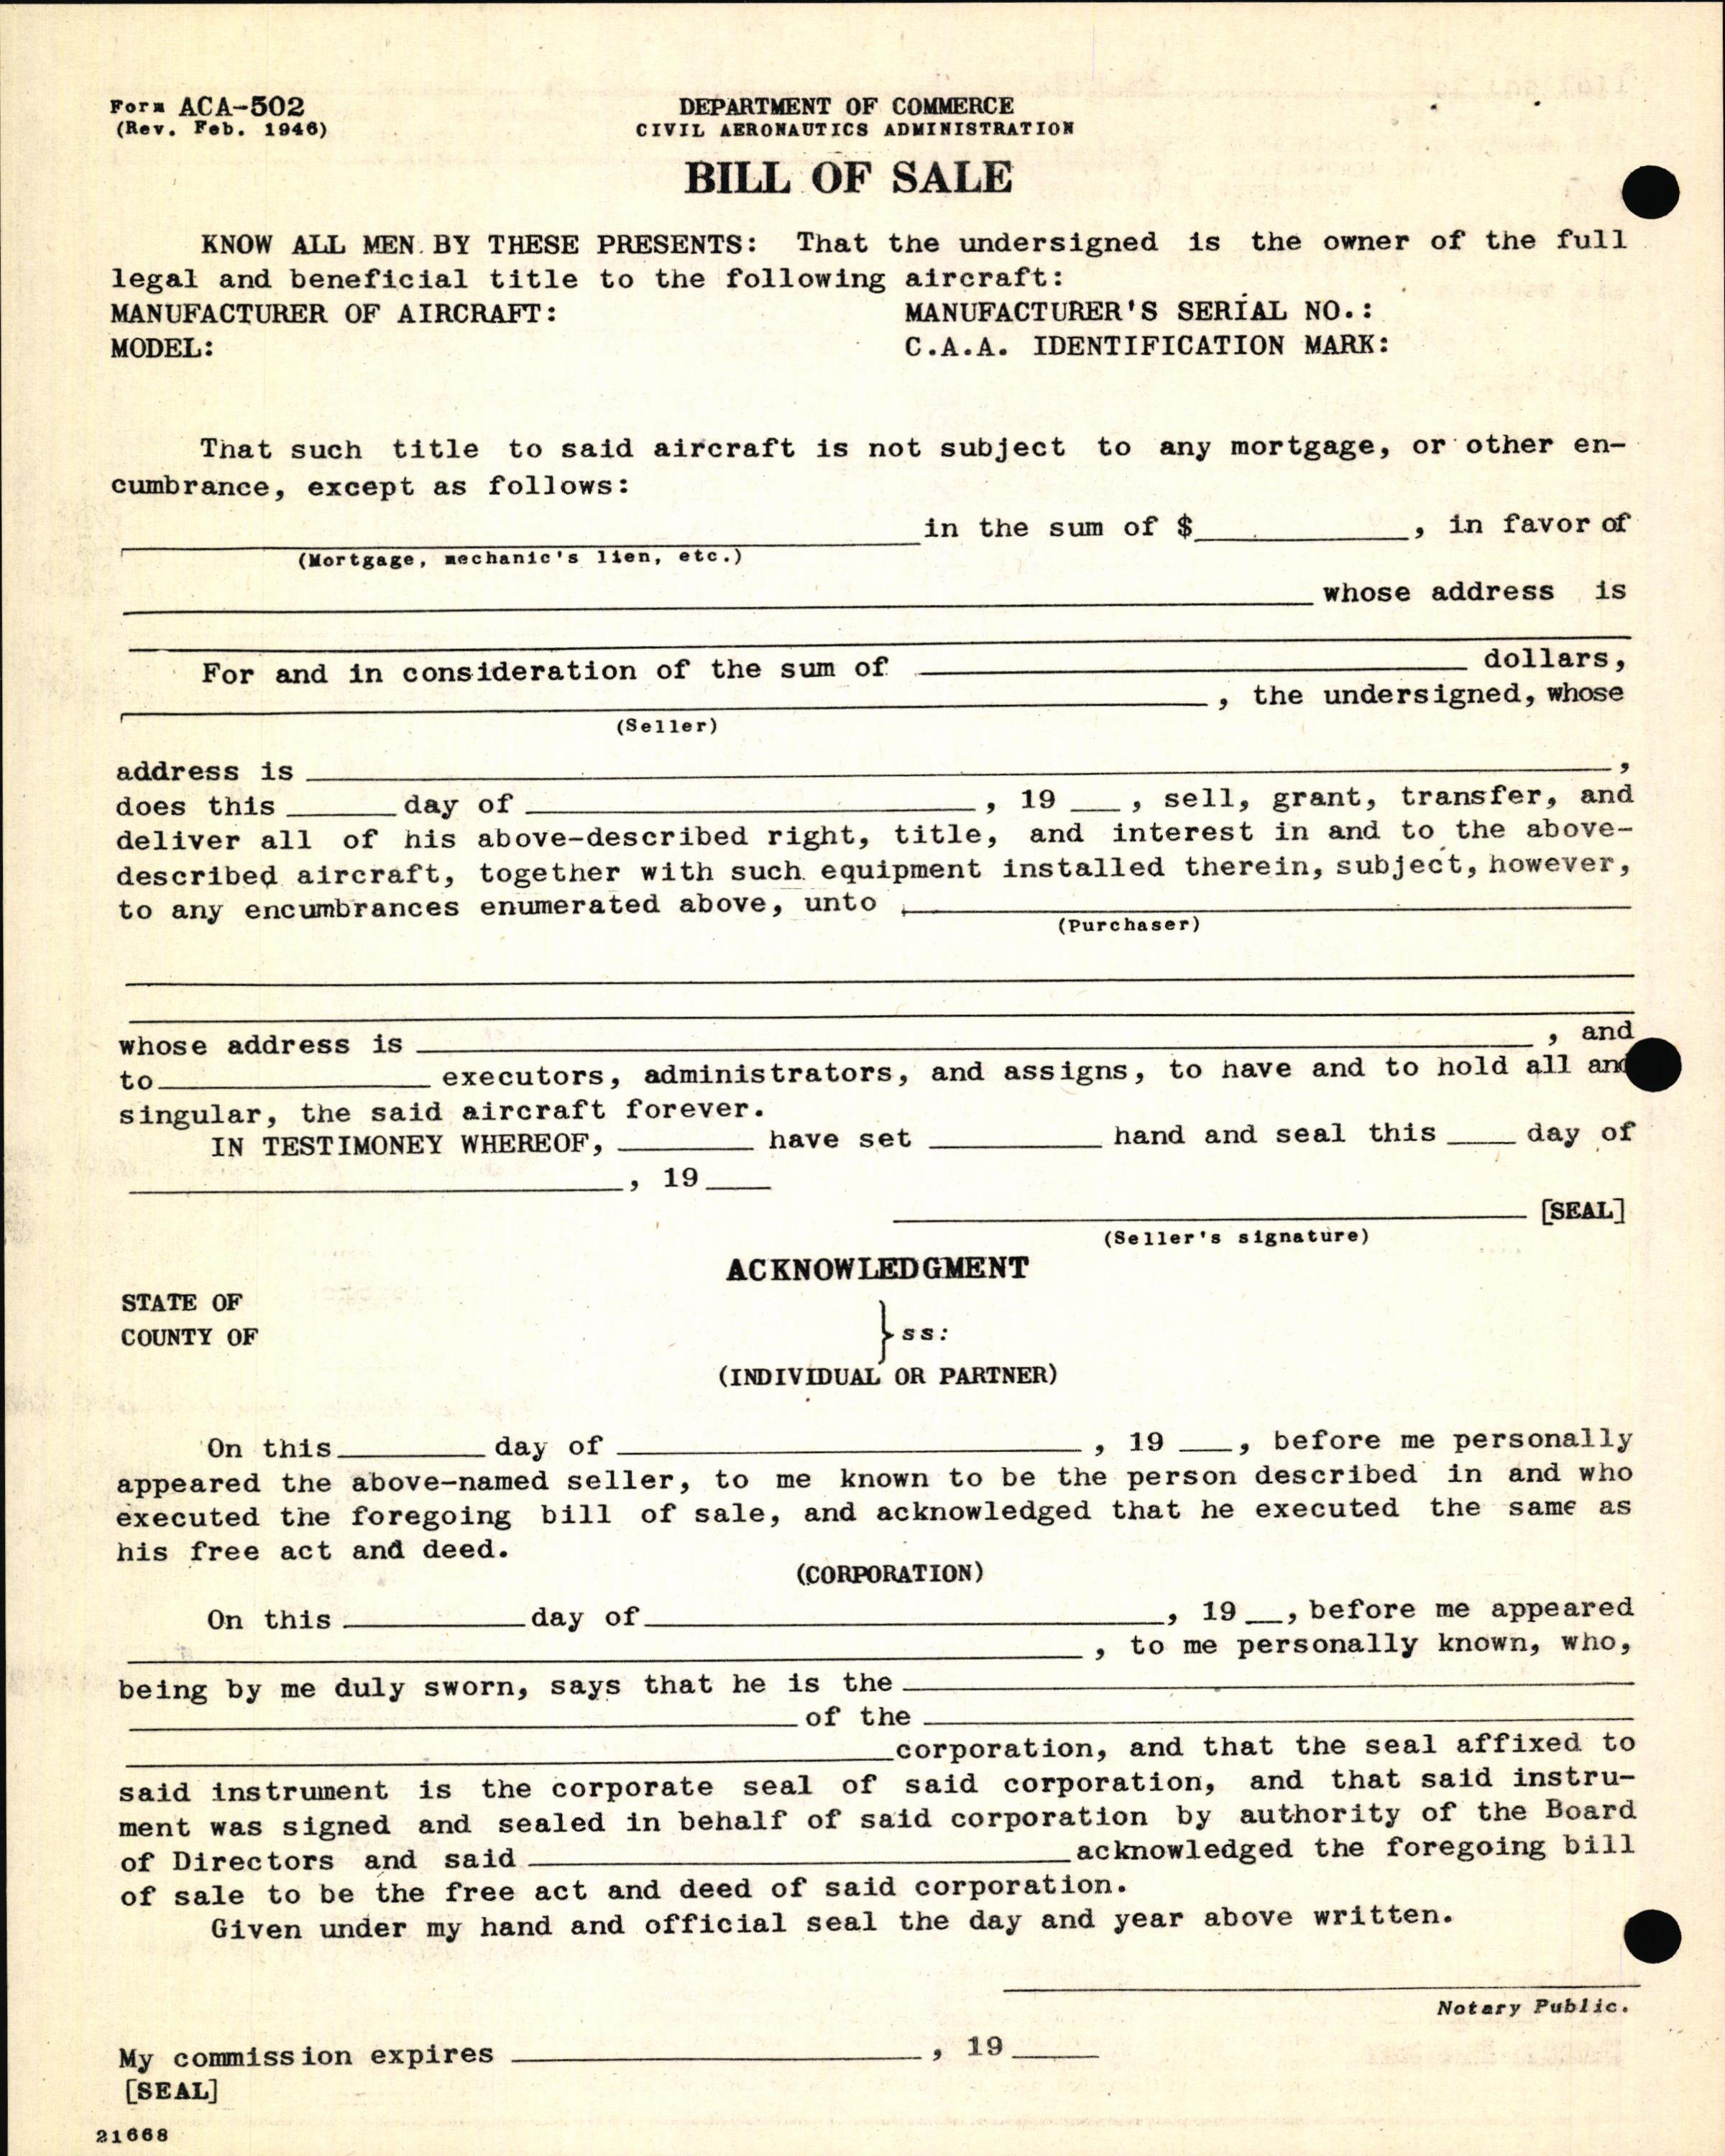 Sample page 6 from AirCorps Library document: Technical Information for Serial Number 1333